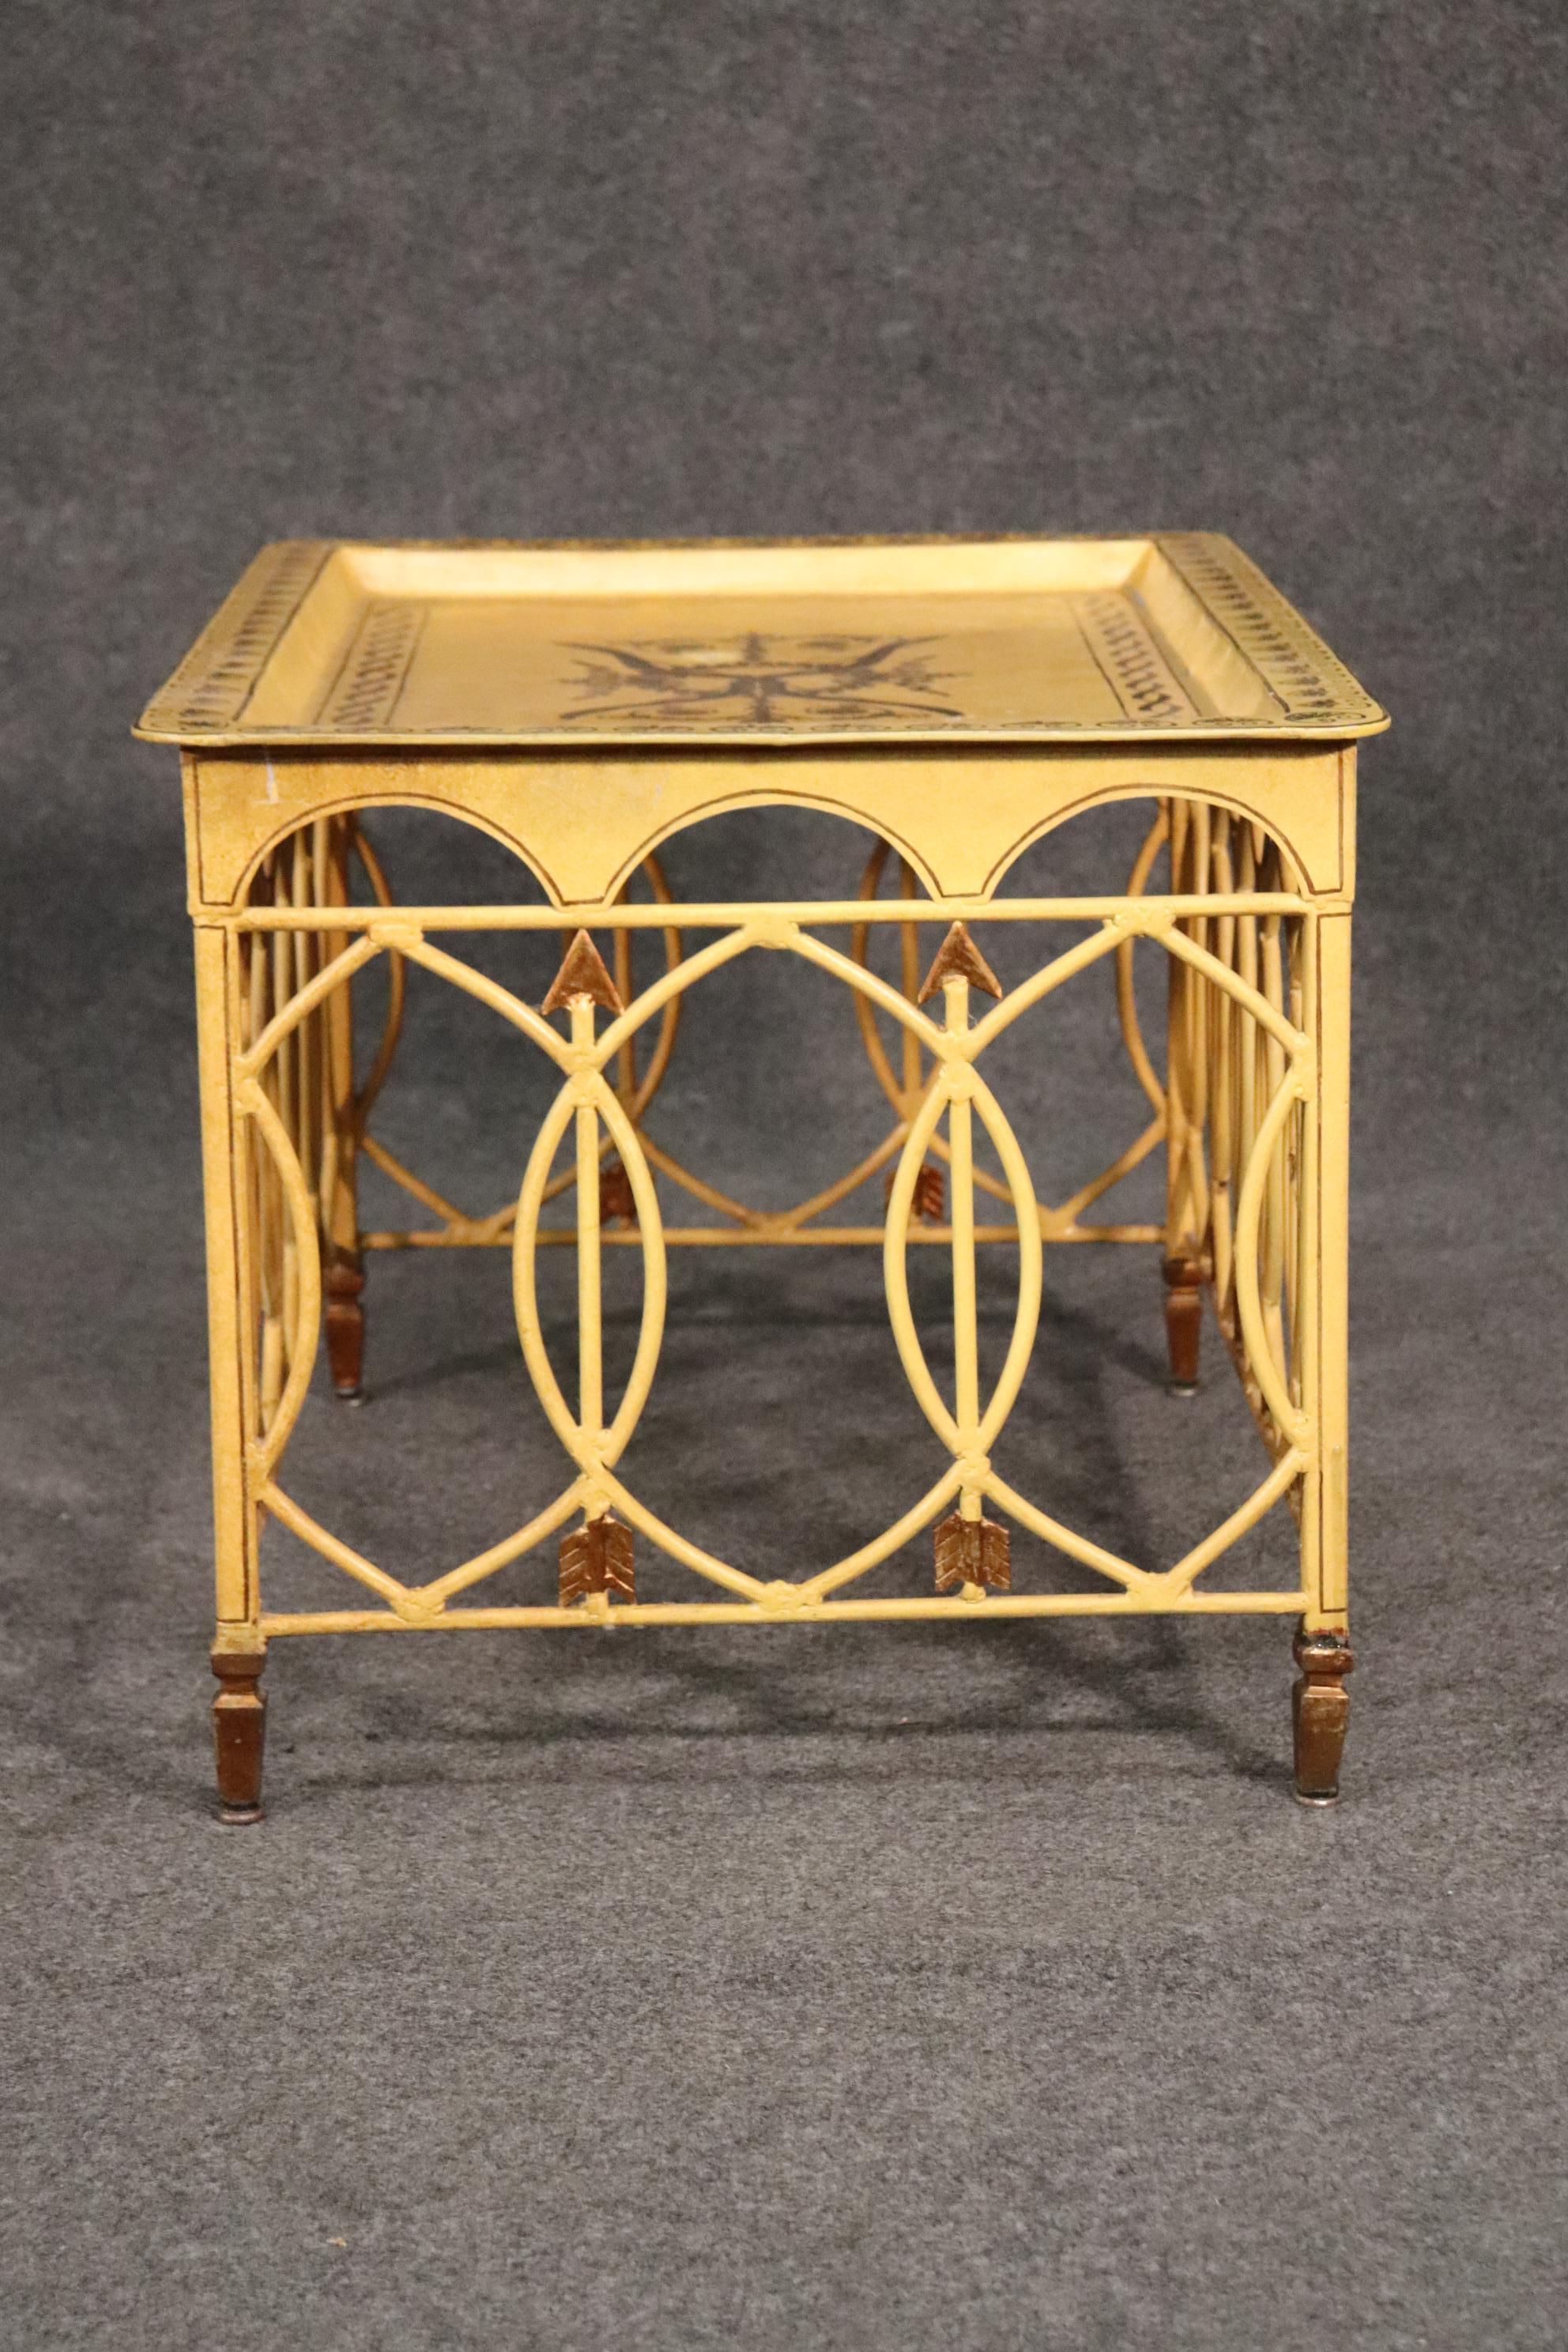 Mid-20th Century Italian Metal Tole Painted Venetian Style Coffee Cocktail Table